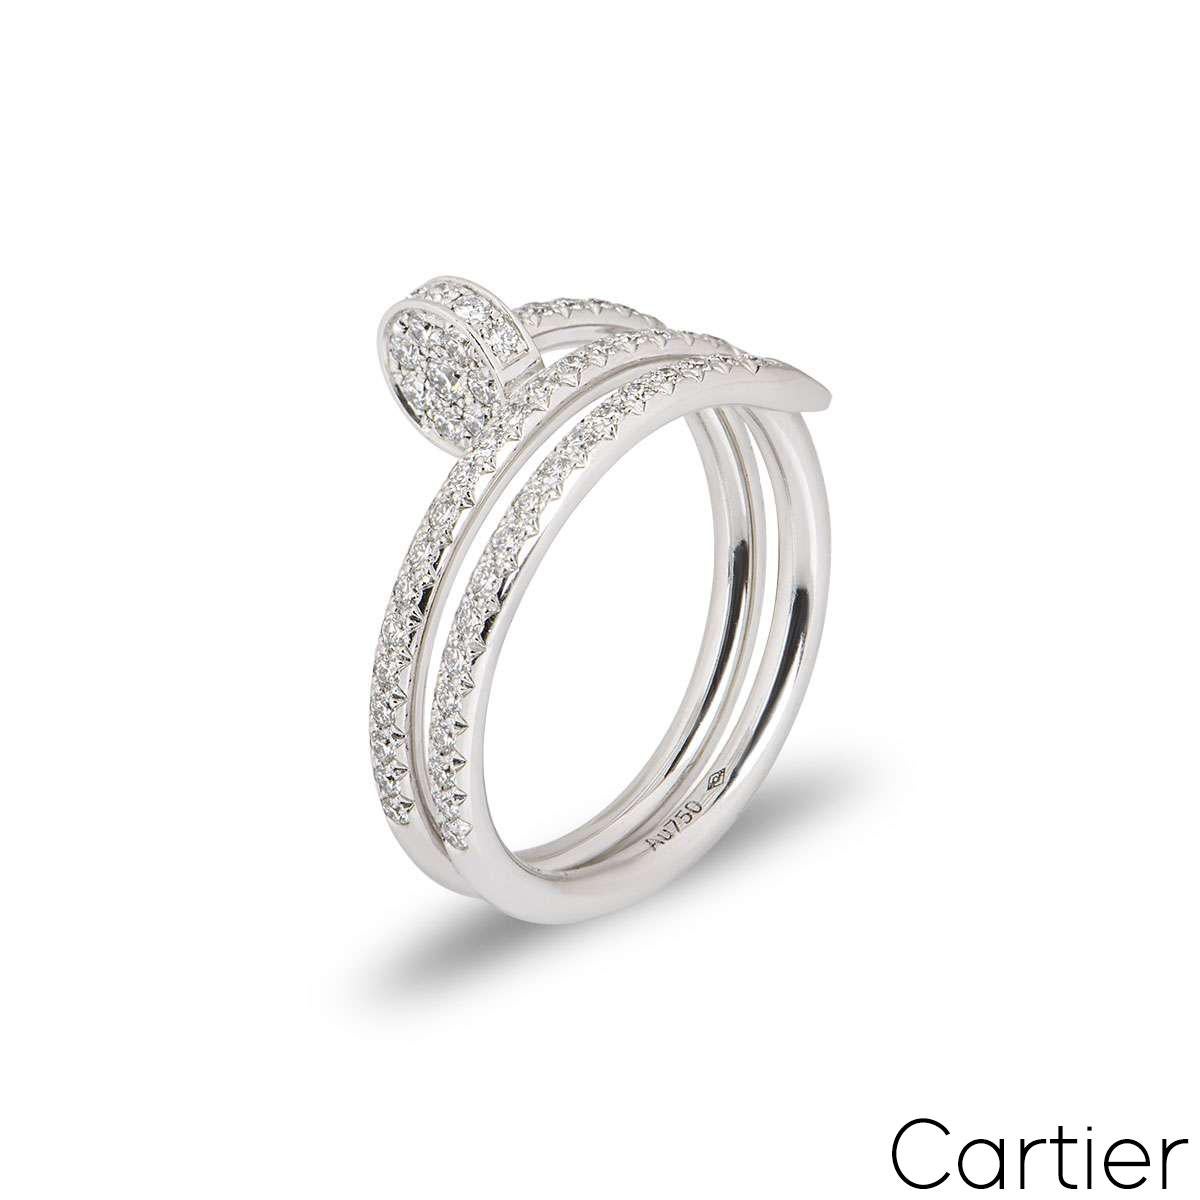 An 18k white gold double Juste Un Clou ring by Cartier. The ring is in the style of a nail wrapping around the finger, set with round brilliant cut diamonds to the front sections. There are 77 diamonds with a total diamond weight of 0.59ct. The ring